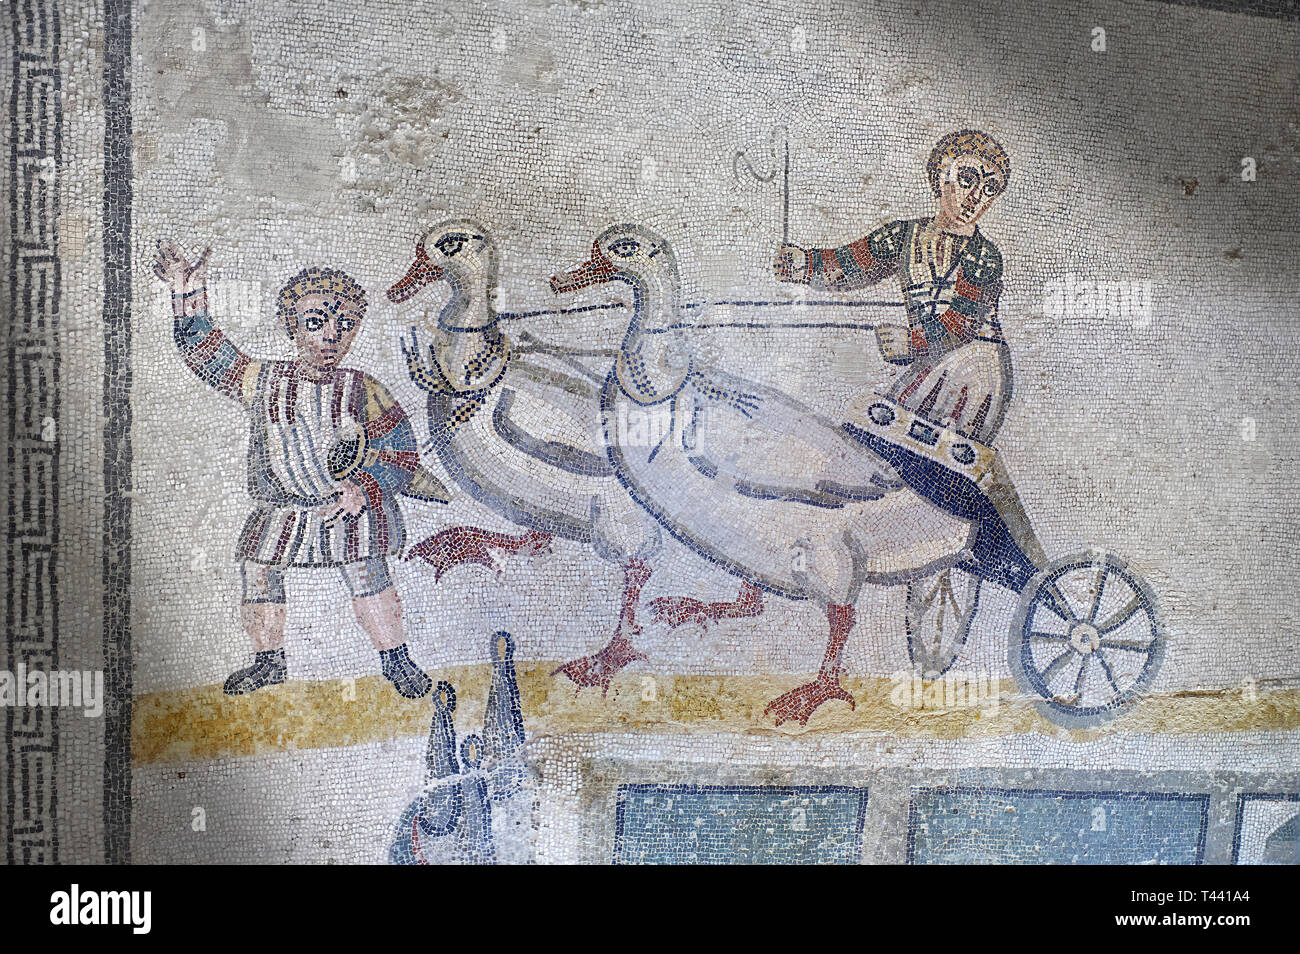 Close up picture of the Roman mosaics of the room of the Small Circus depicting Roman boys riding small chariots pulled by geese in a small circus, Th Stock Photo